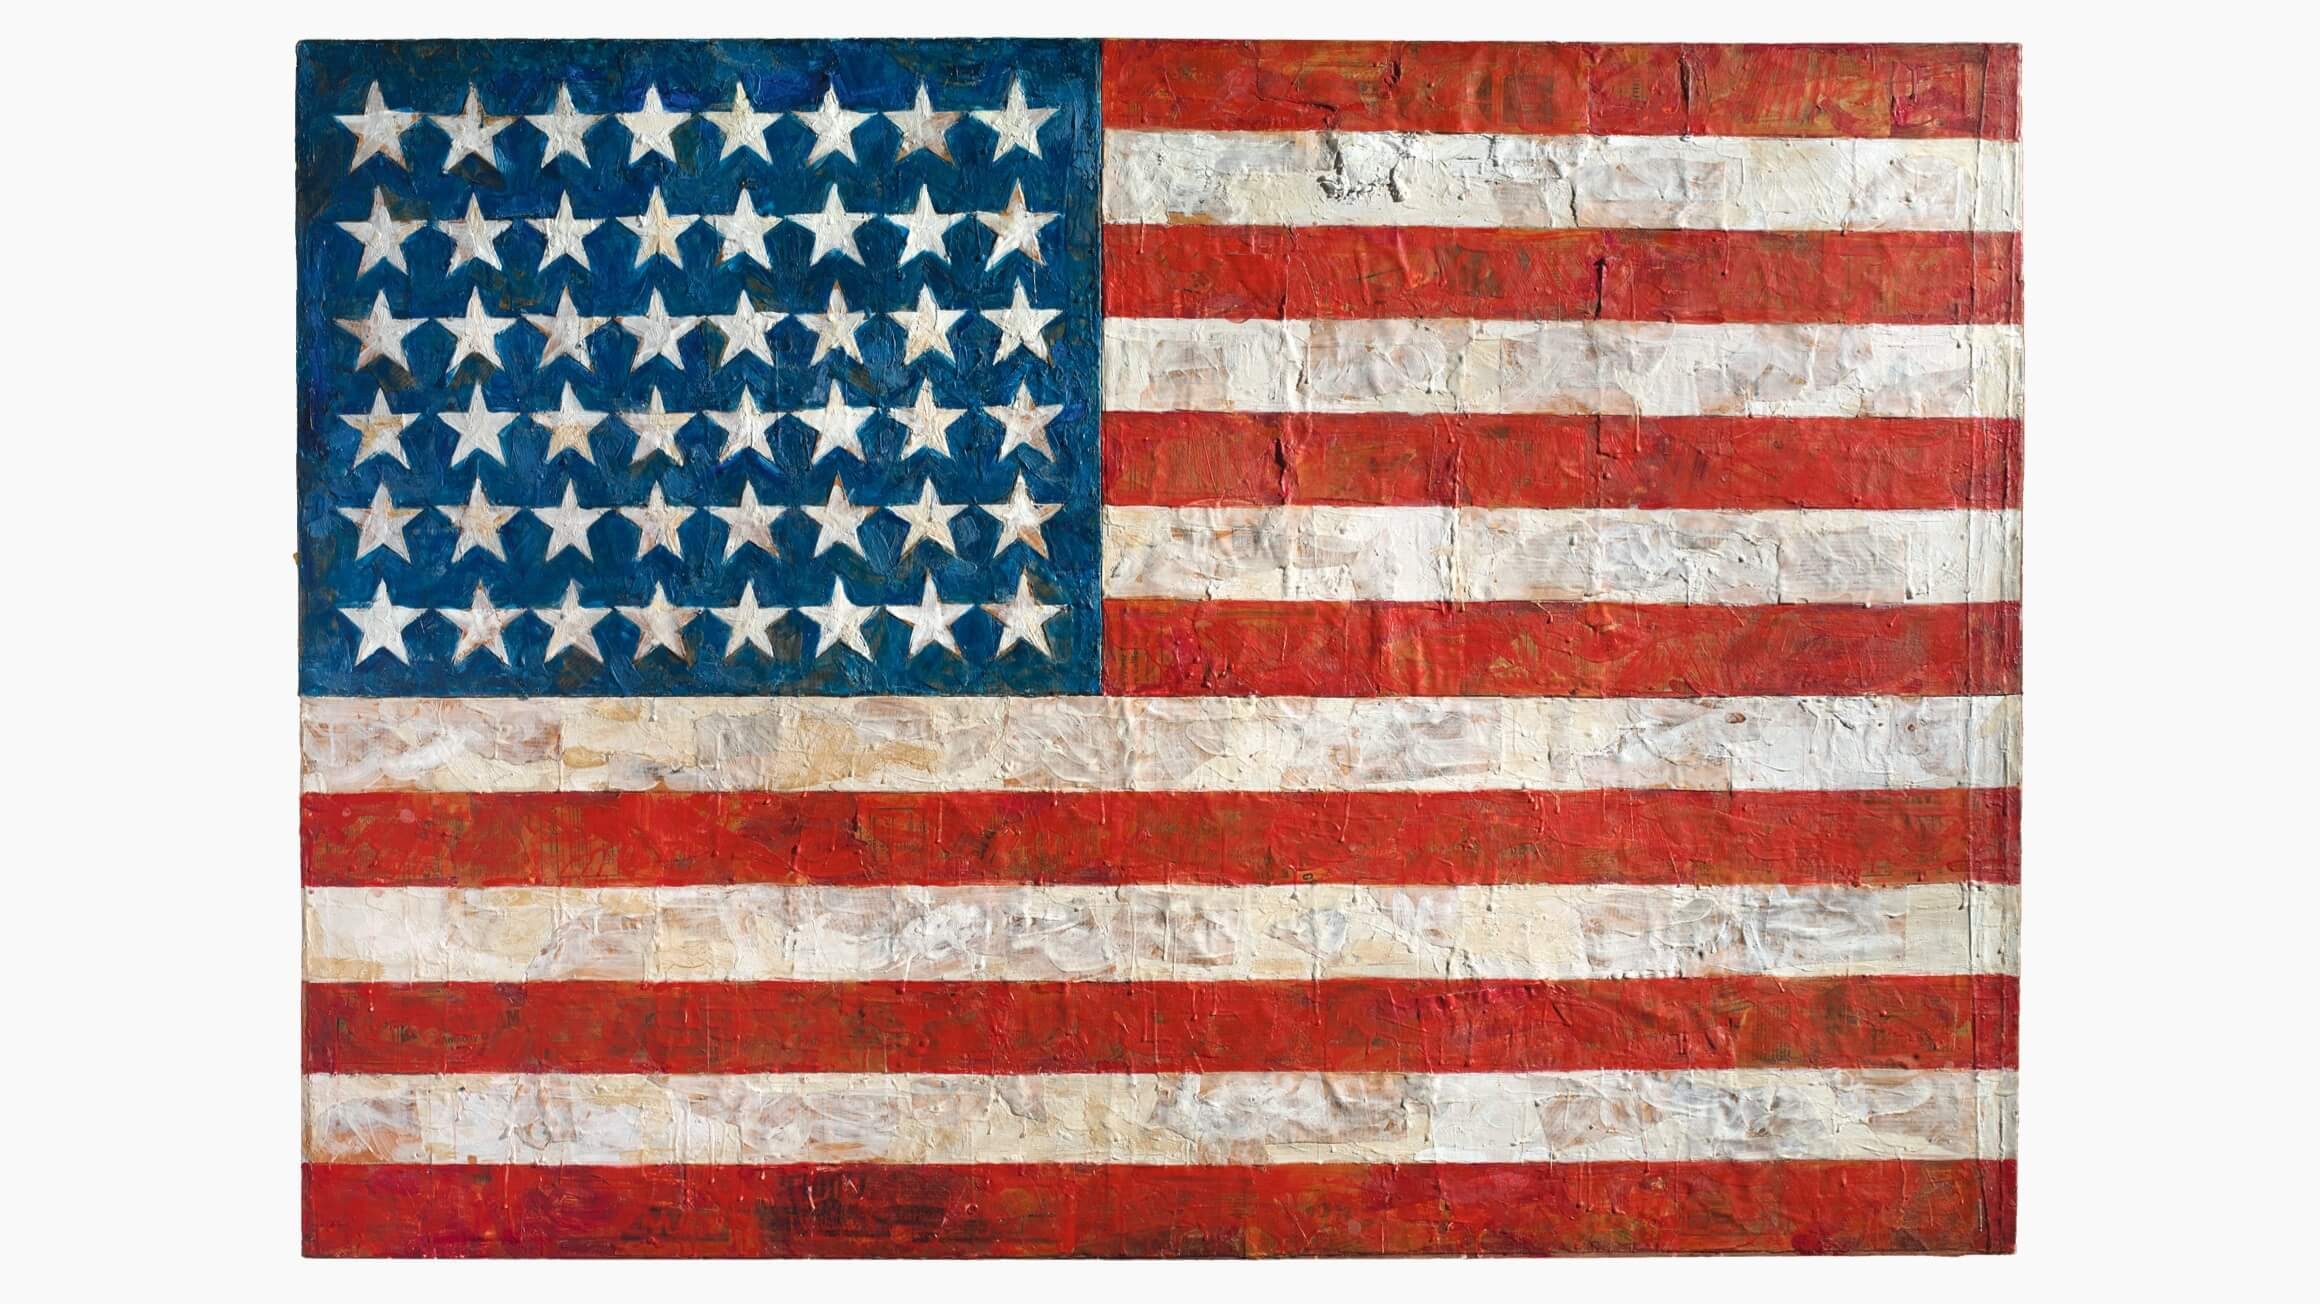 Flag, 1954–55, by Jasper Johns (Foto: The Museum of Modern Art, New York: Gift of Philip Johnson in honor of Alfred H. Barr, Jr., 106.1973) © Jasper Johns/Licensed by VAGA at Artists Rights Society (ARS), New York)